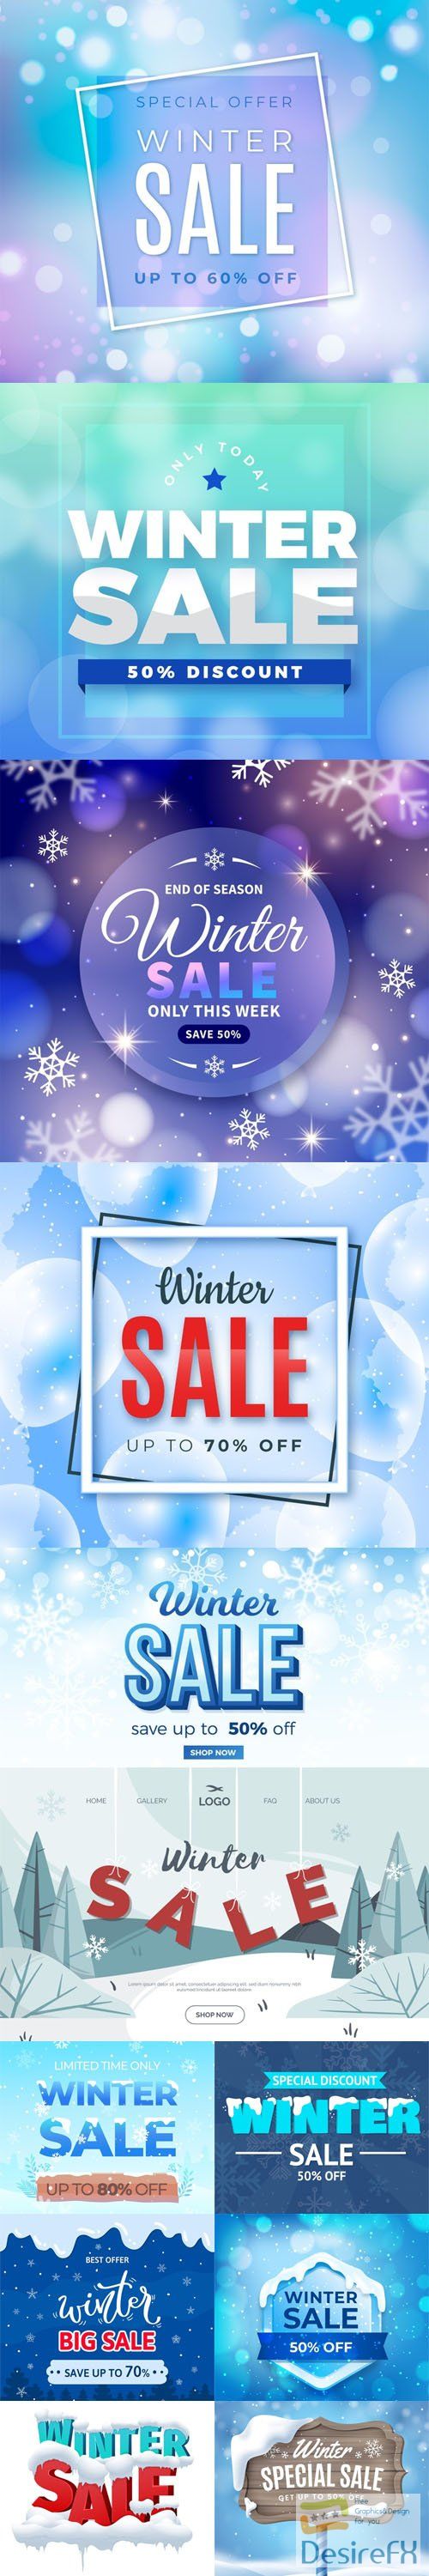 12 Winter Sales Backgrounds Collection in Vector